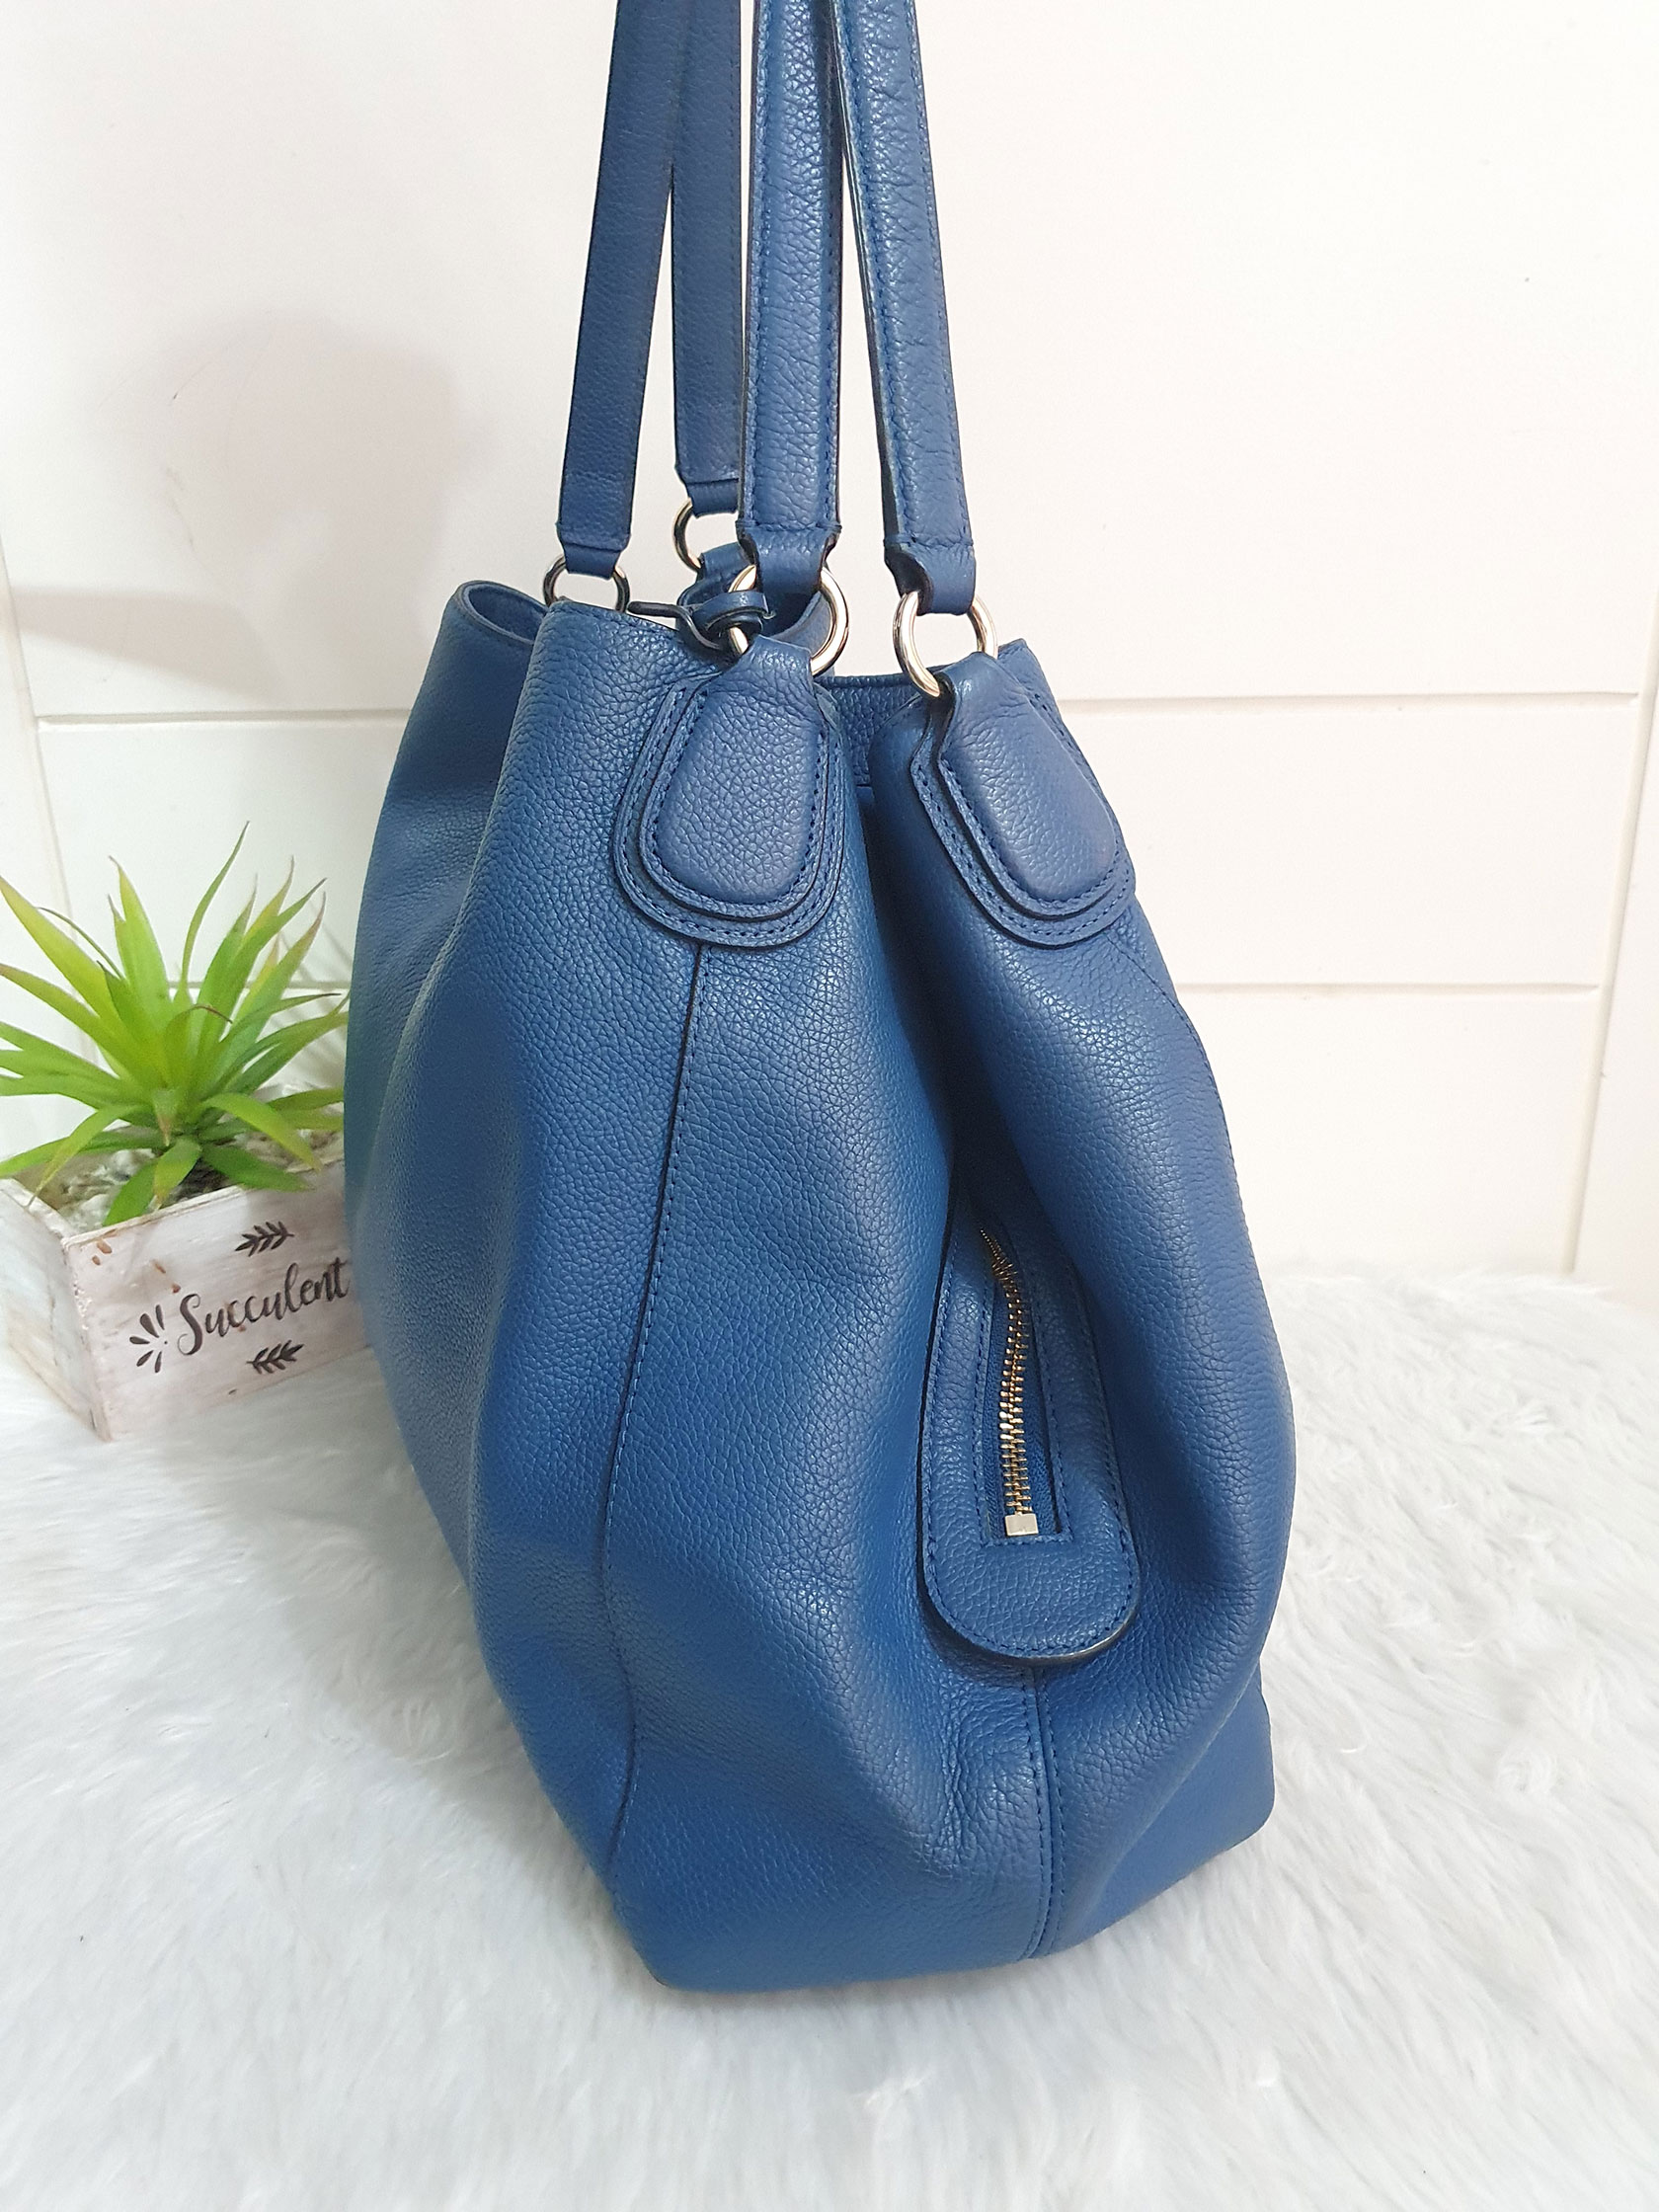 Coach Tote Bag in Great Condition – Mommy Micah – Luxury Bags Trusted Seller Philippines